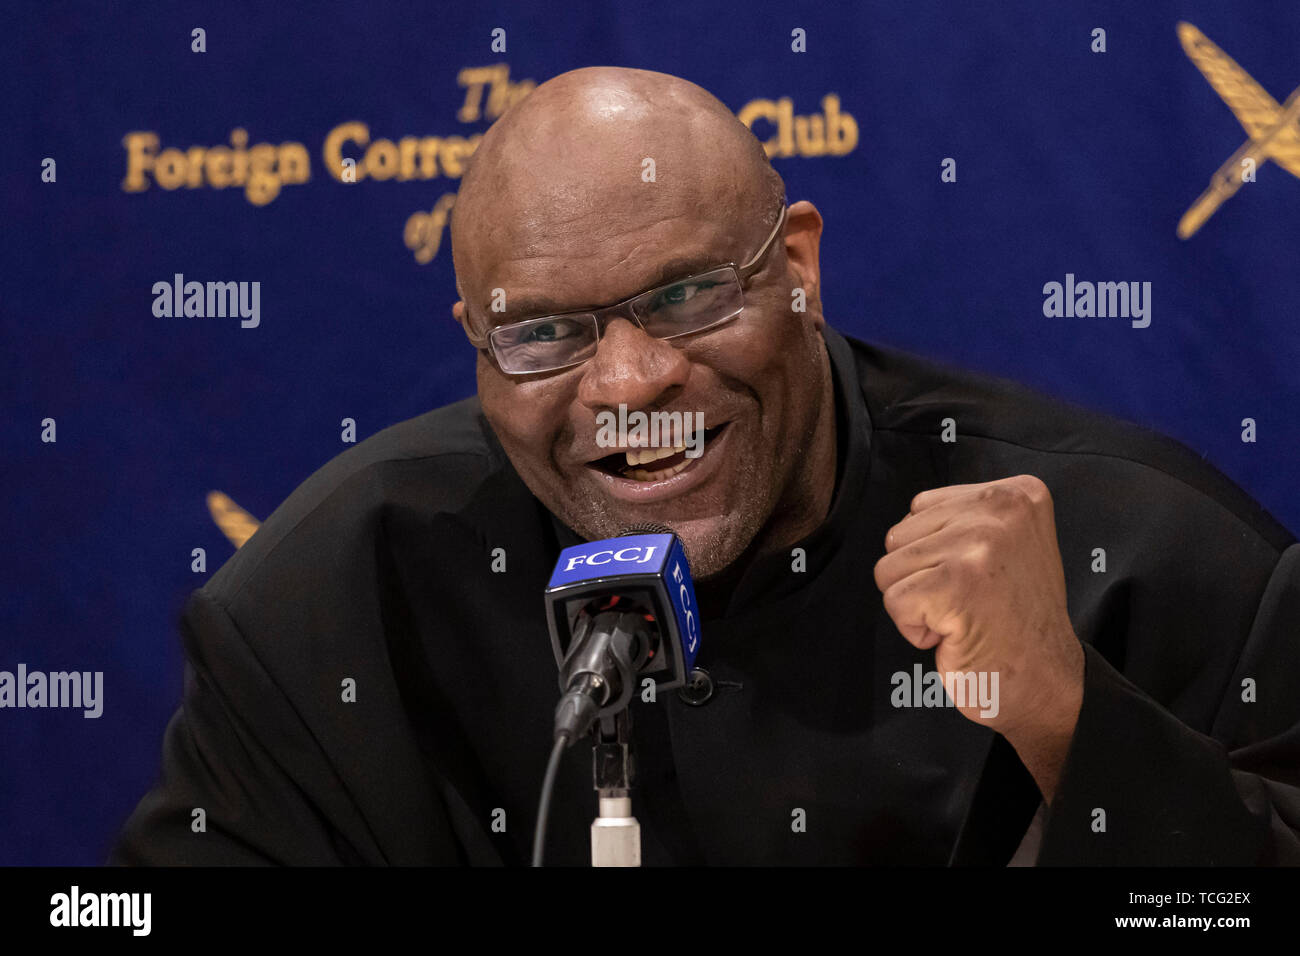 Tokyo, Japan. 07th June, 2019. American pro fighter and actor Bob Sapp speaks during a news conference at The Foreign Correspondents' Club of Japan. Sapp, who is also a former American NFL player, WWE professional wrestler and World Champion kick boxer visited the Club to share his opinions about the Japanese TV industry as a foreigner celebrity in Japan. As actor he participated in several movies including 'Conan the Barbarian' and with Adam Sandler in 'The Longest Yard'. Credit: Rodrigo Reyes Marin/AFLO/Alamy Live News Stock Photo